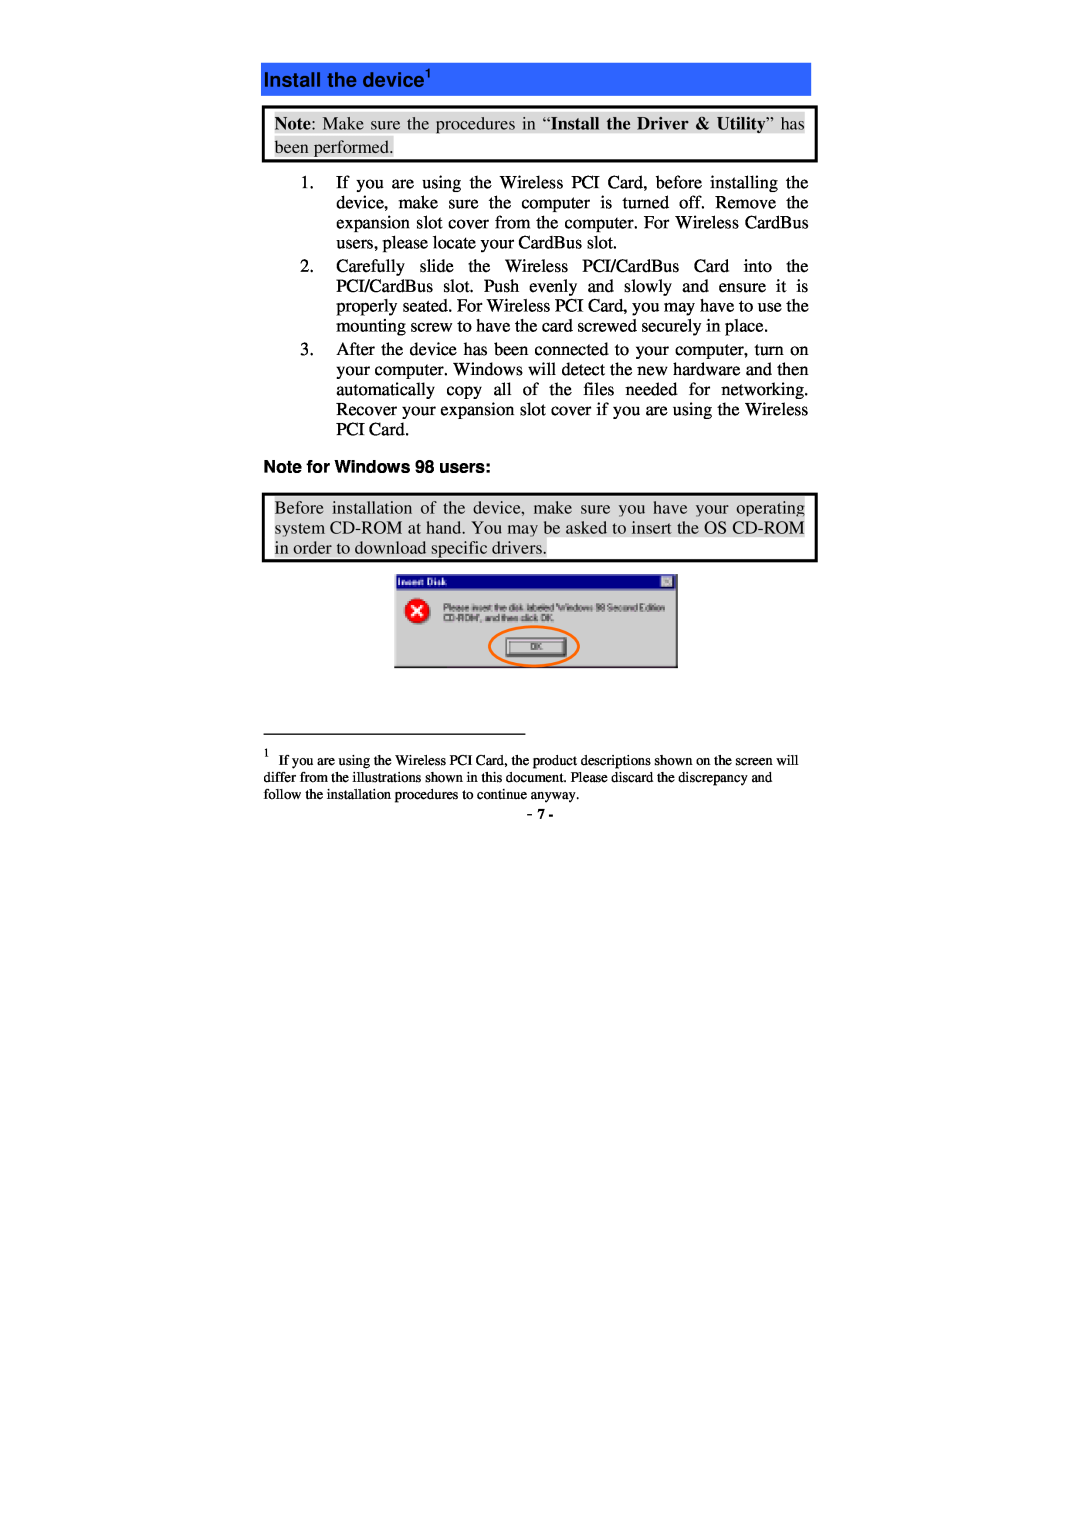 Xterasys Wireless LAN Card user manual Install the device1, Note for Windows 98 users 